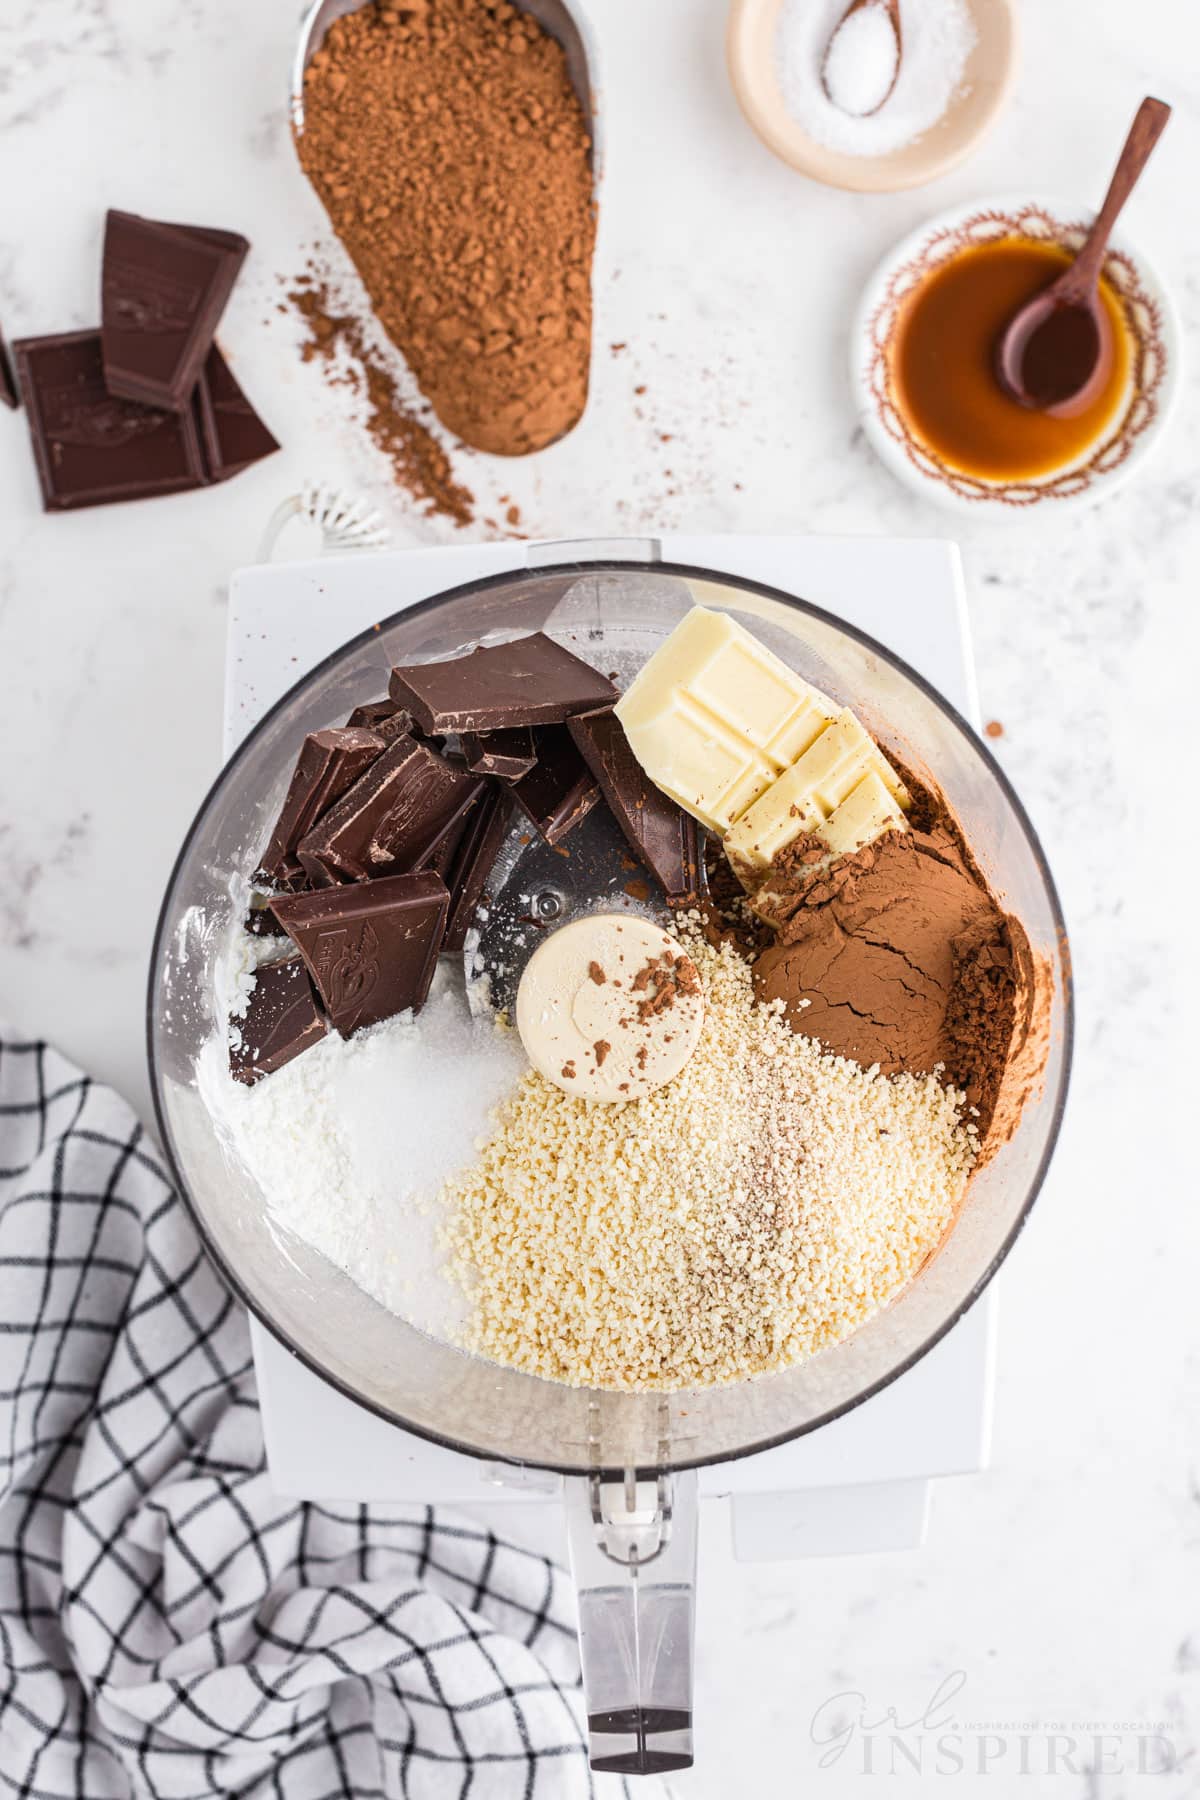 Hot cocoa ingredients added to a food processor, checkered linen, pieces of semi-sweet chocolate bar, metal measuring cup with unsweetened cocoa powder, bowl of sea salt, on a marble countertop.